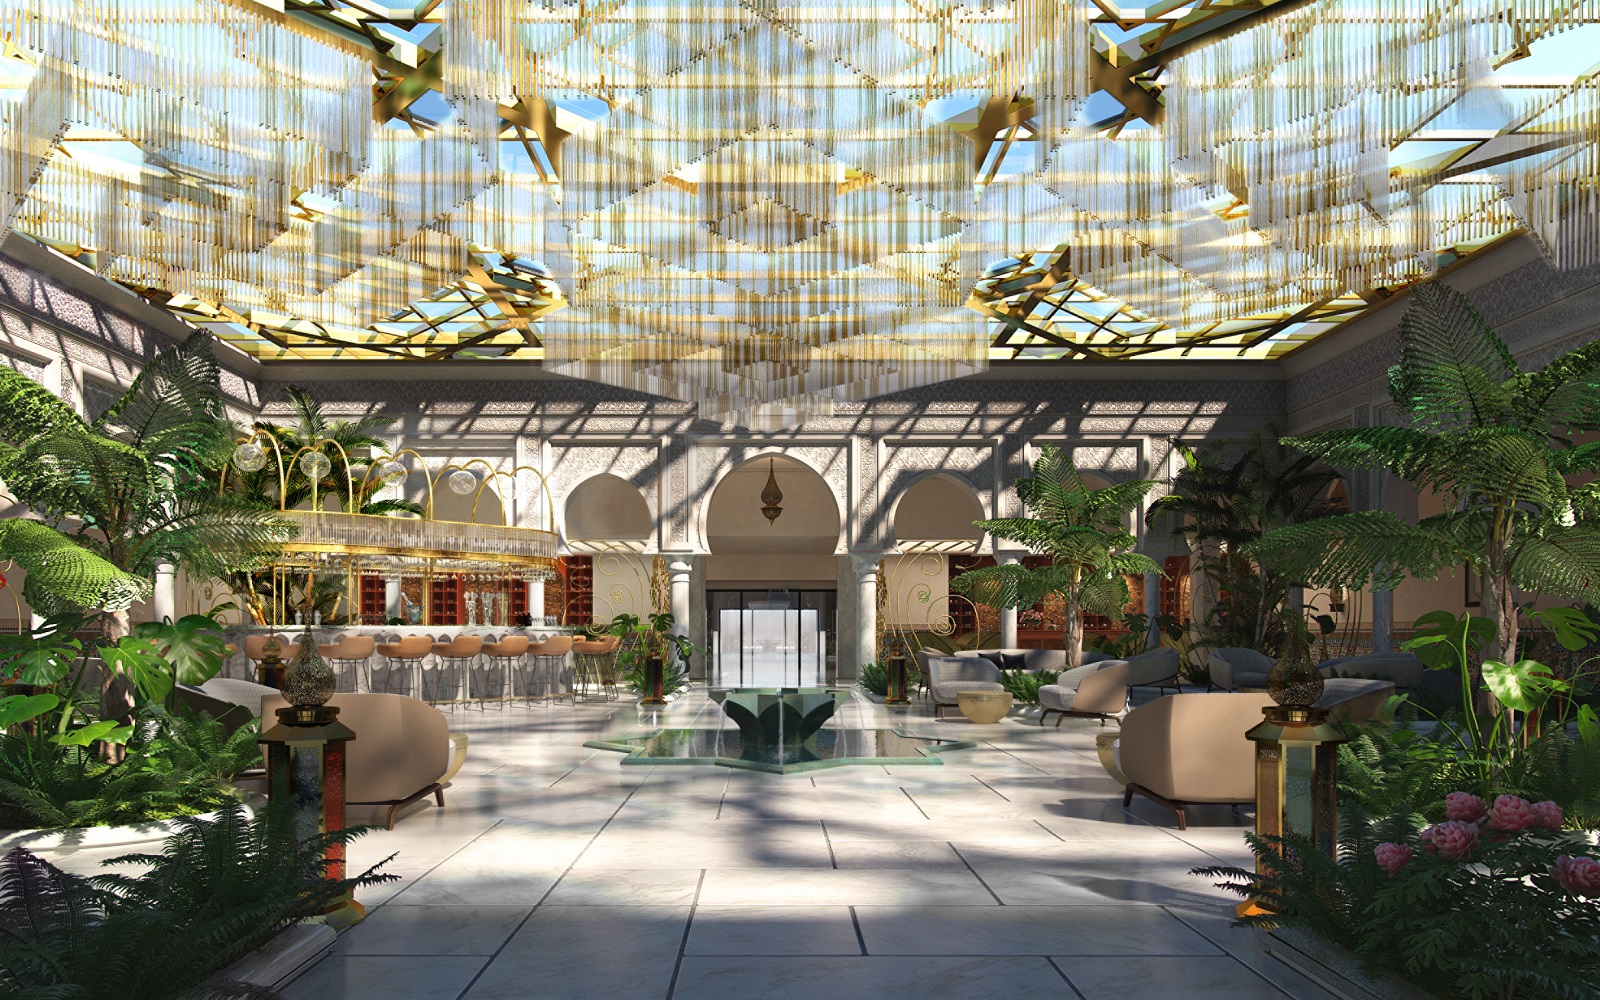 central lobby in Four Seasons Hotel Rabat at Kasr Al Bahr with fountain, plants and glass covered roof